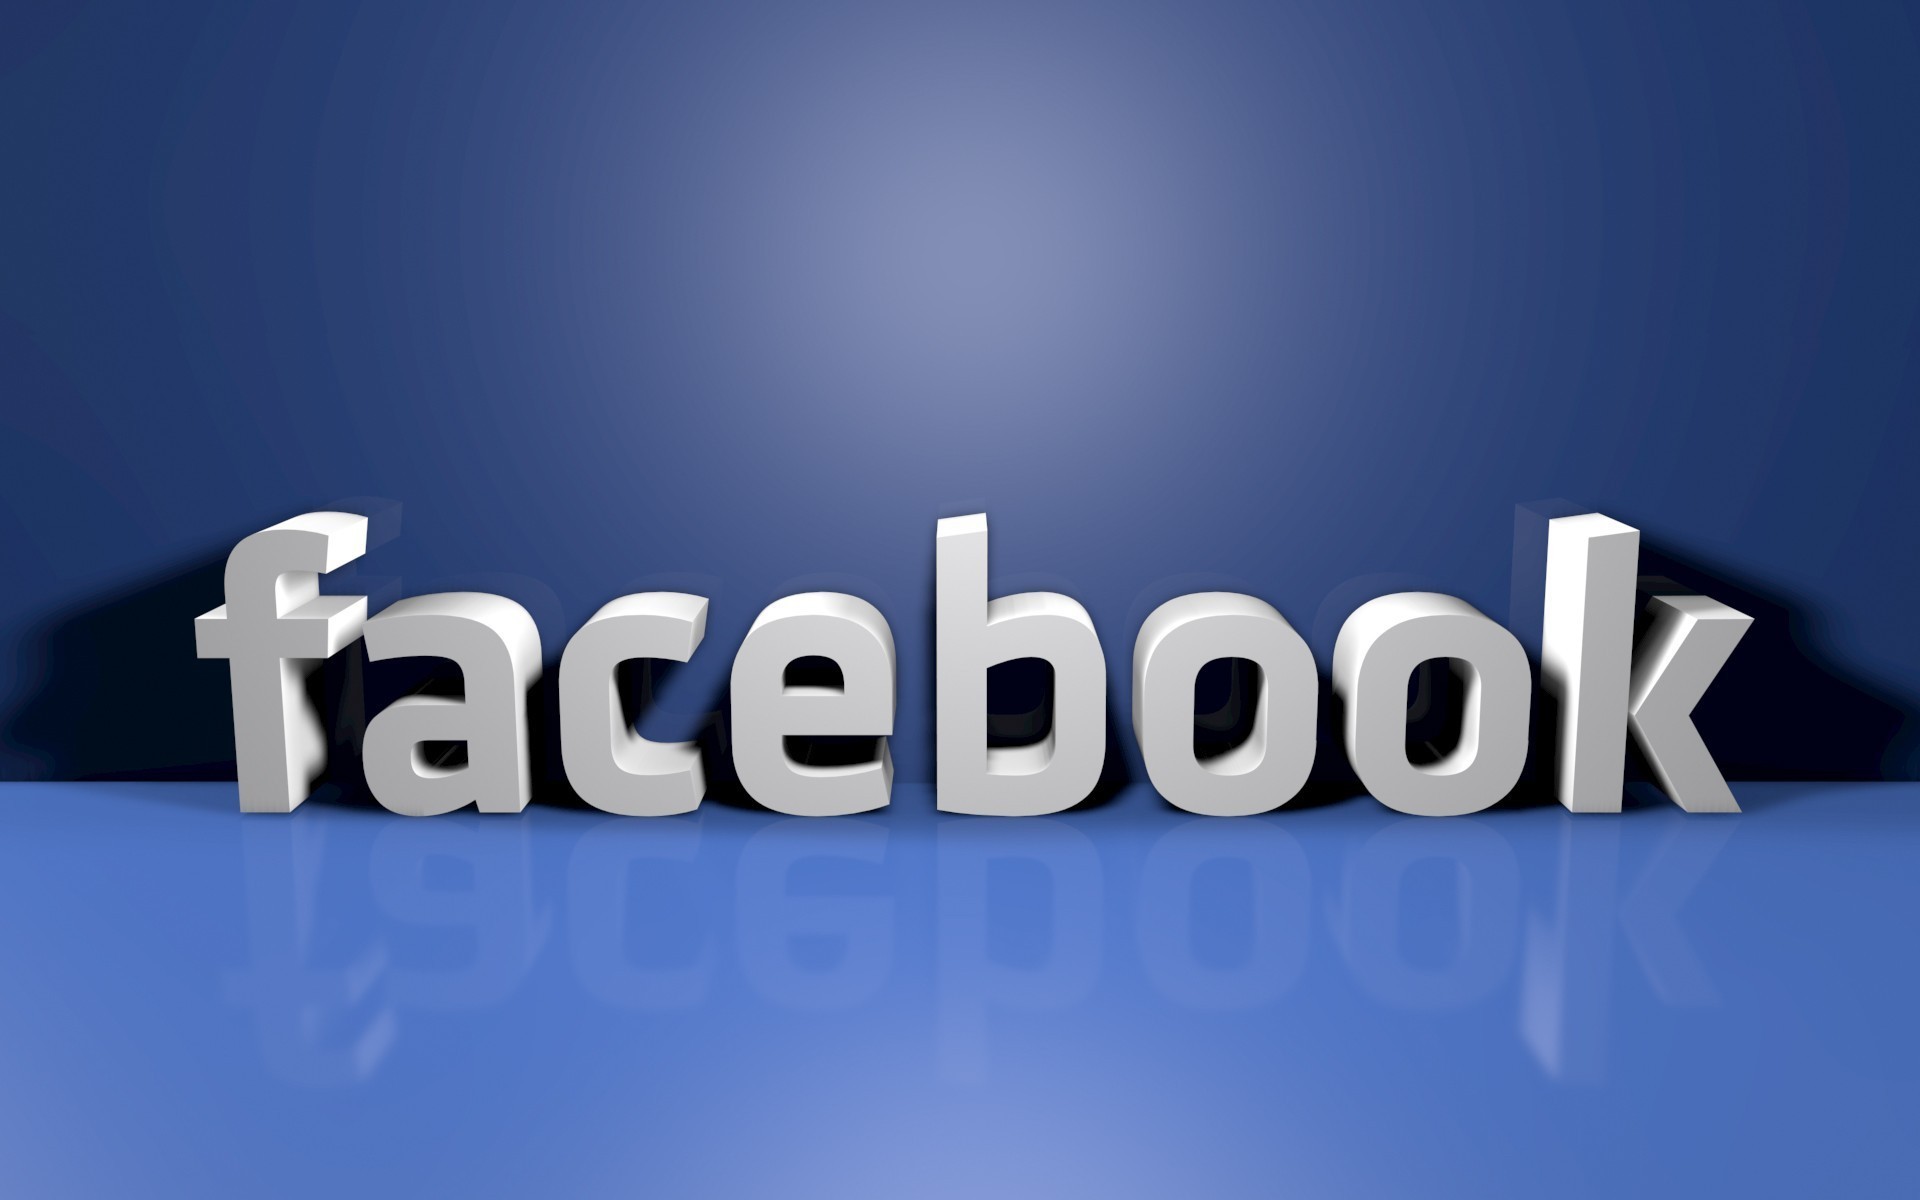 Facebook On A Blue Background Wallpapers And Images Wallpapers